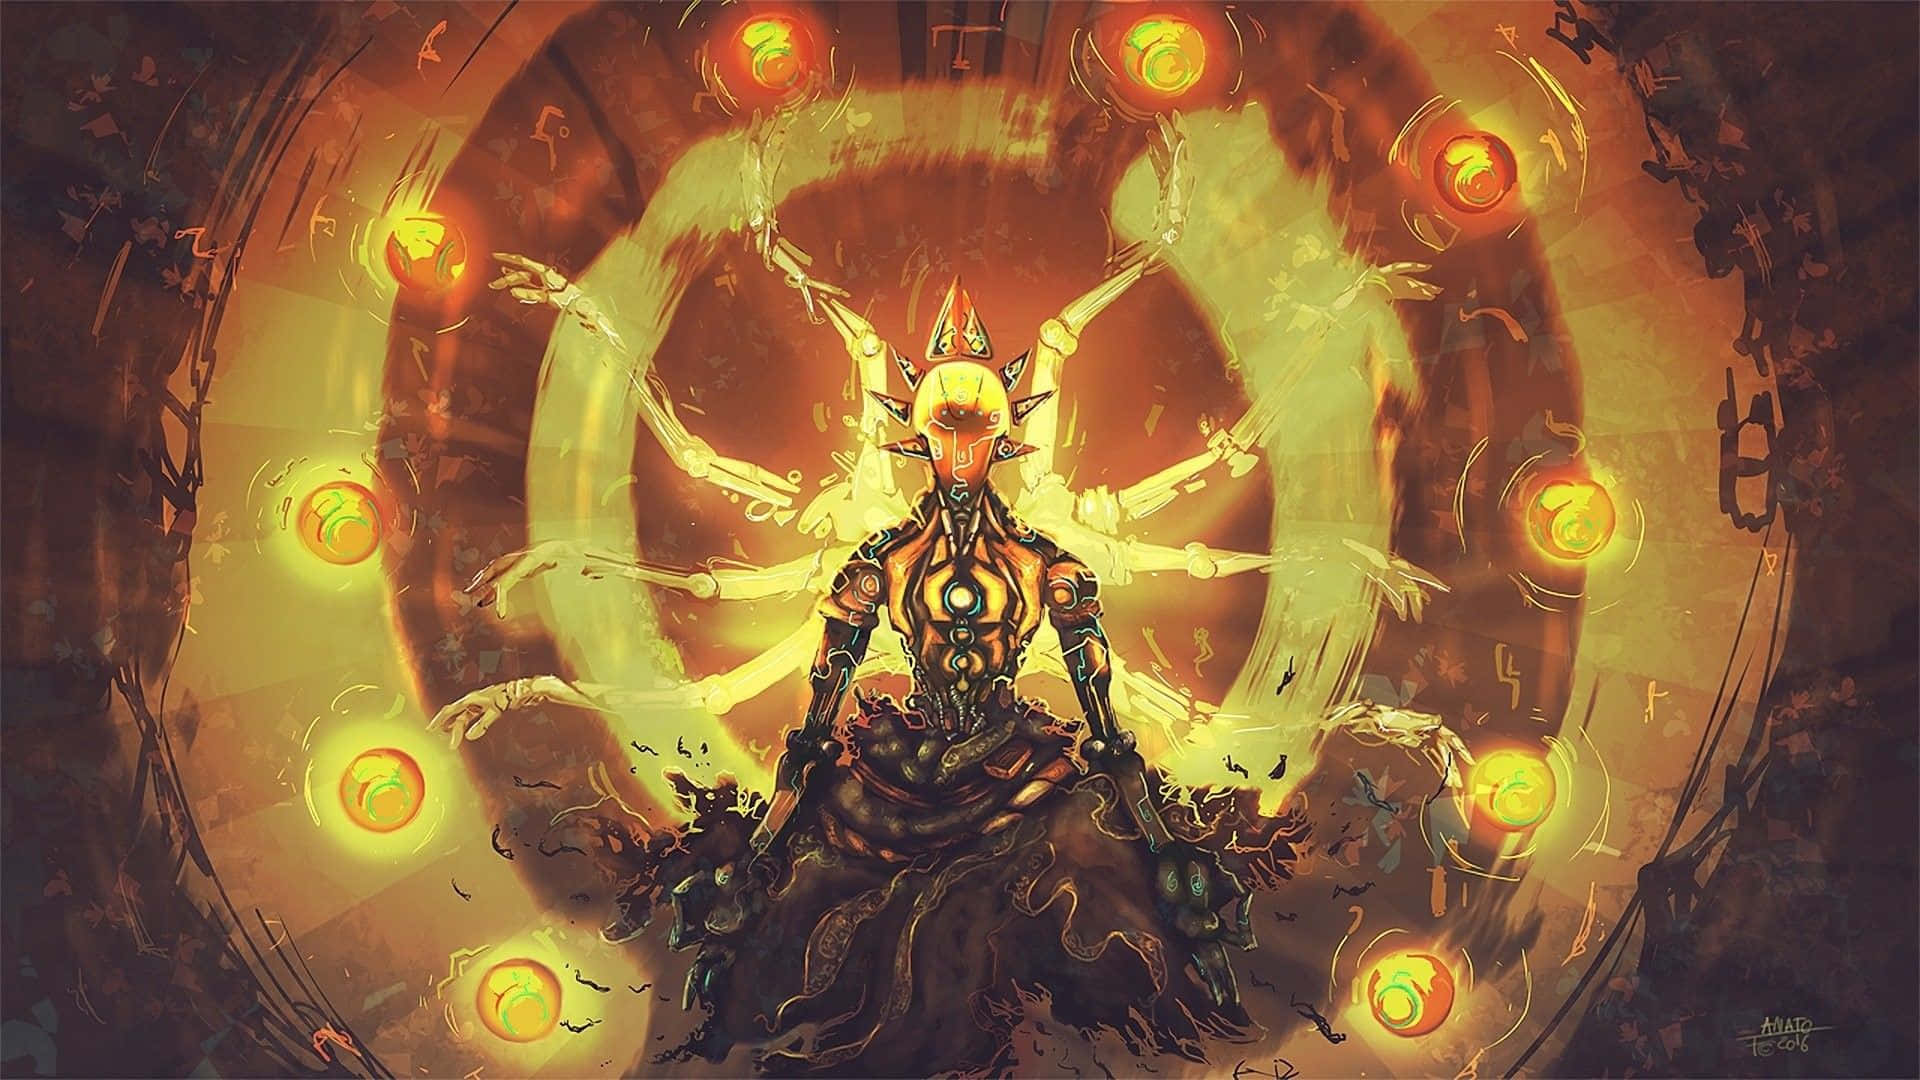 Celebrate Strength and Courage with Zenyatta Wallpaper